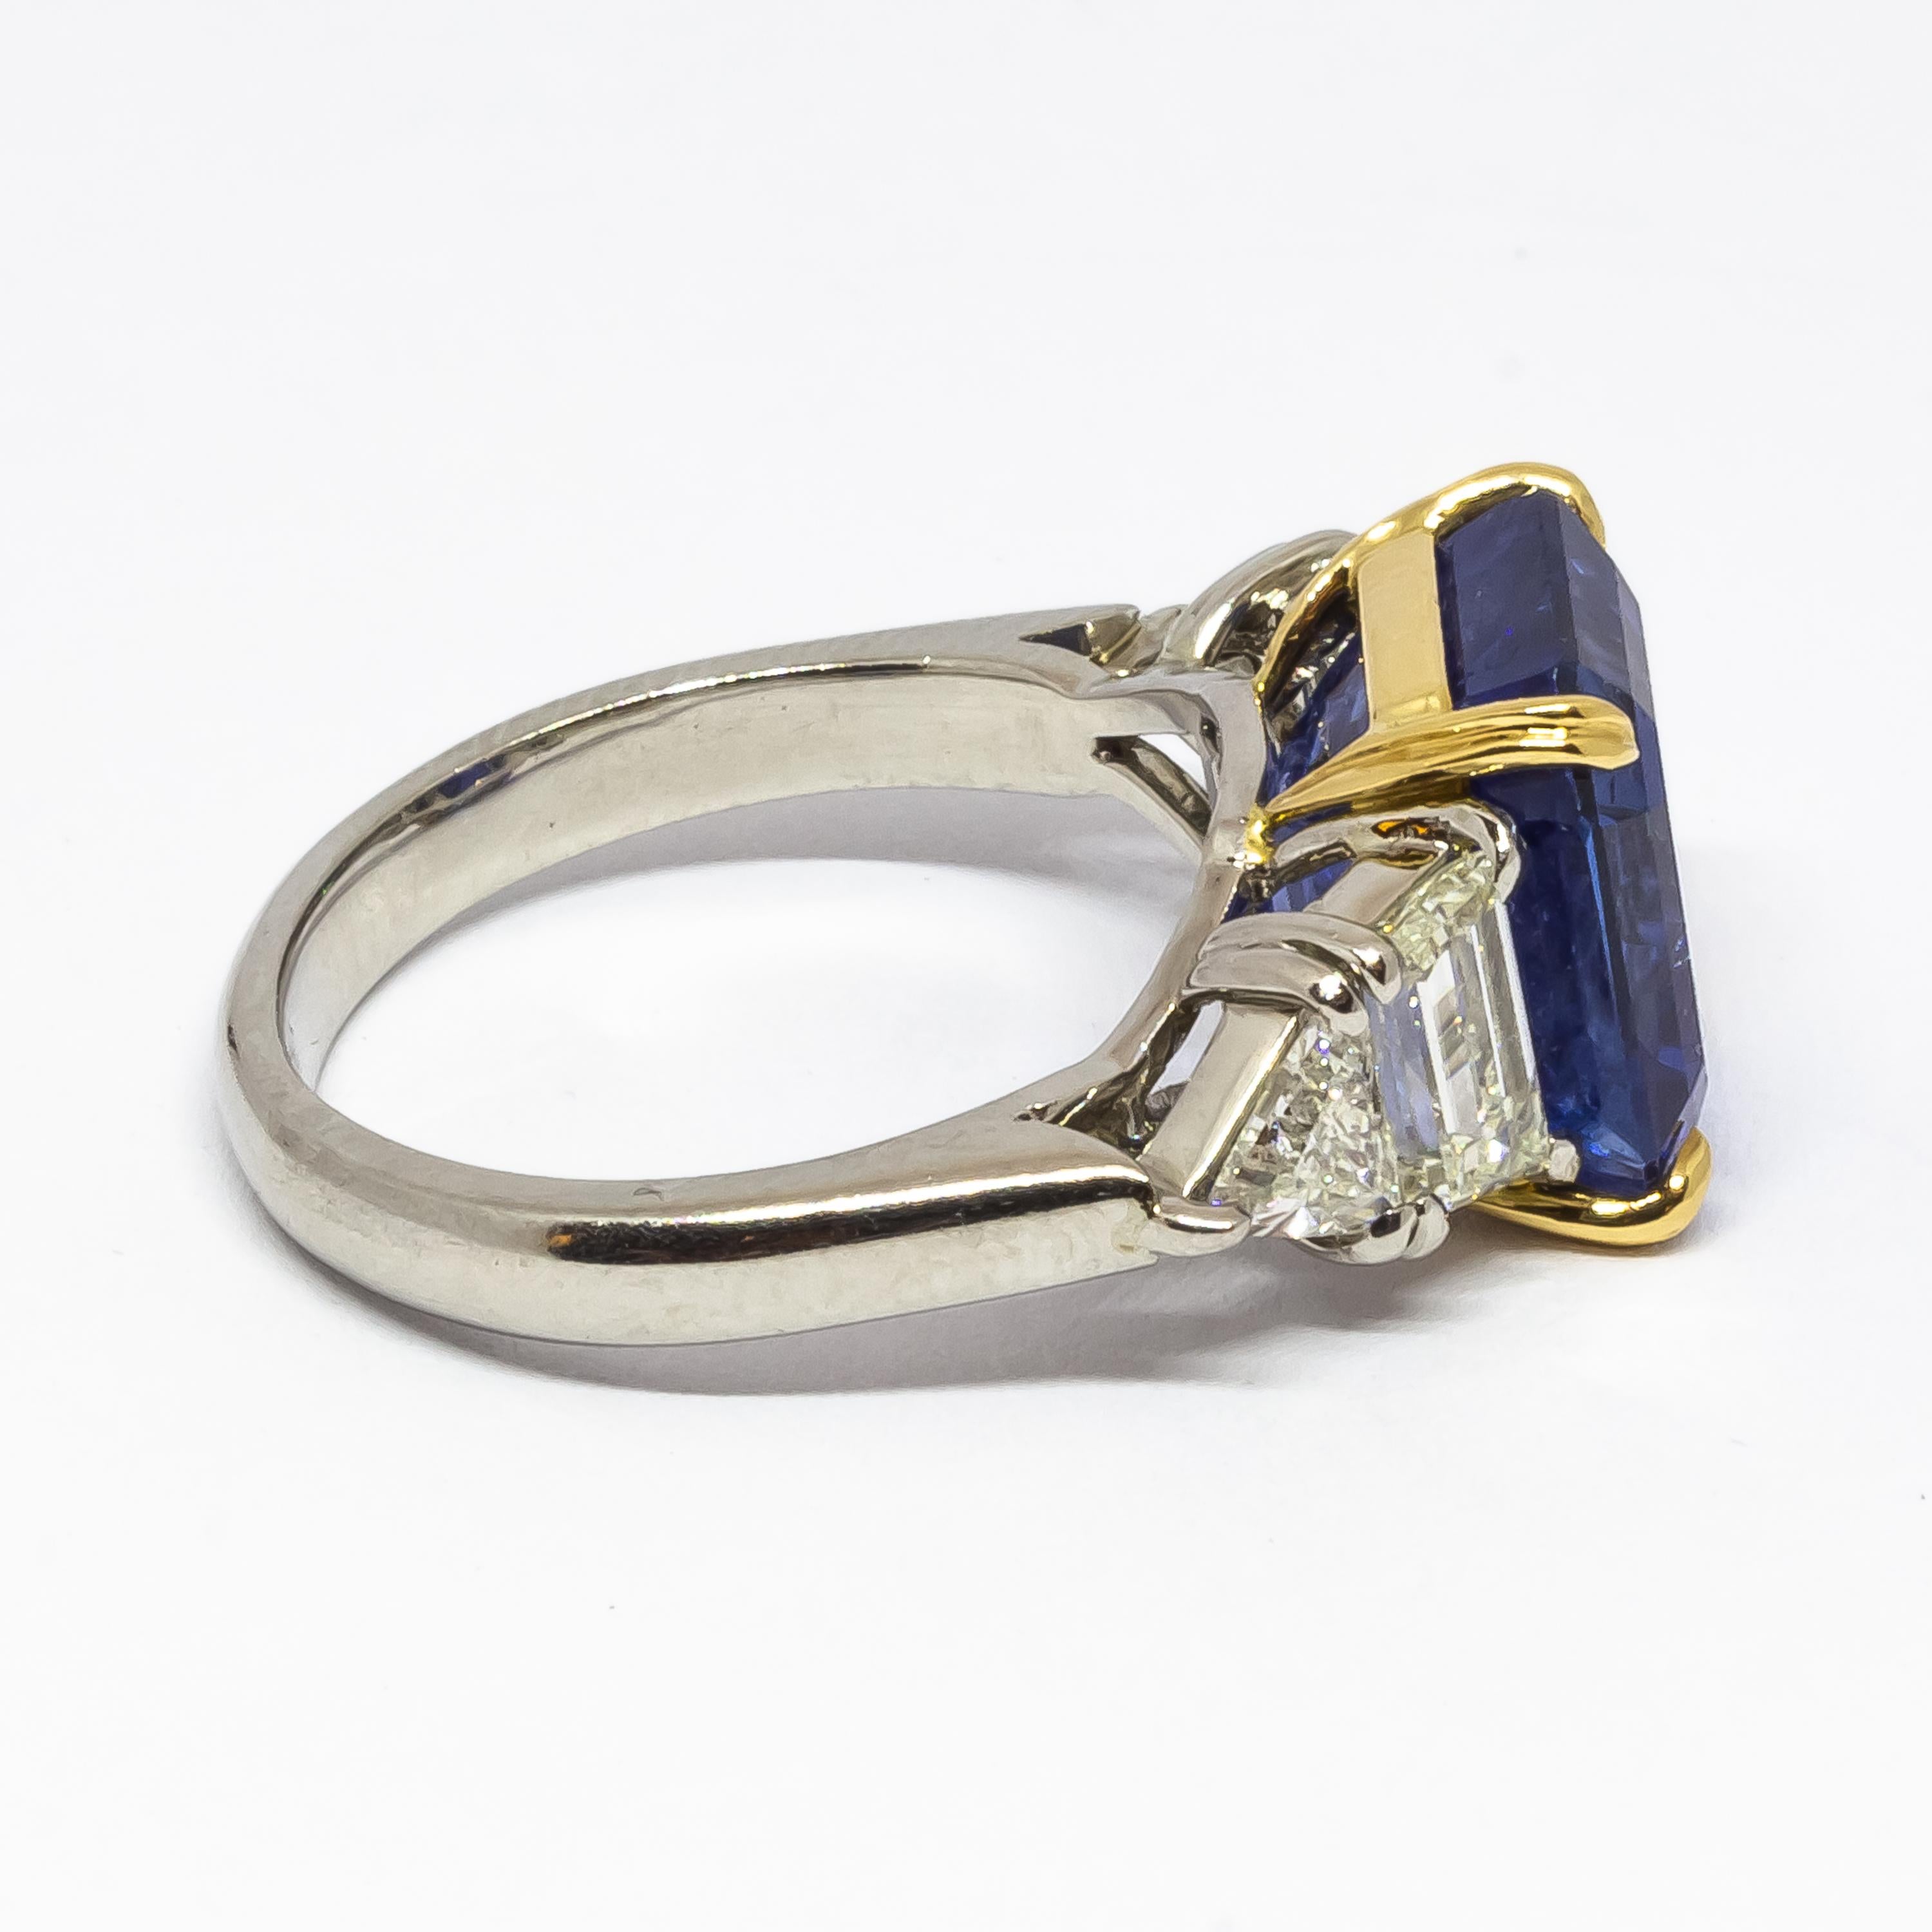 Women's Cartier 7.51 Carat GIA Certified Burma Sapphire, Diamond, Gold and Platinum Ring For Sale